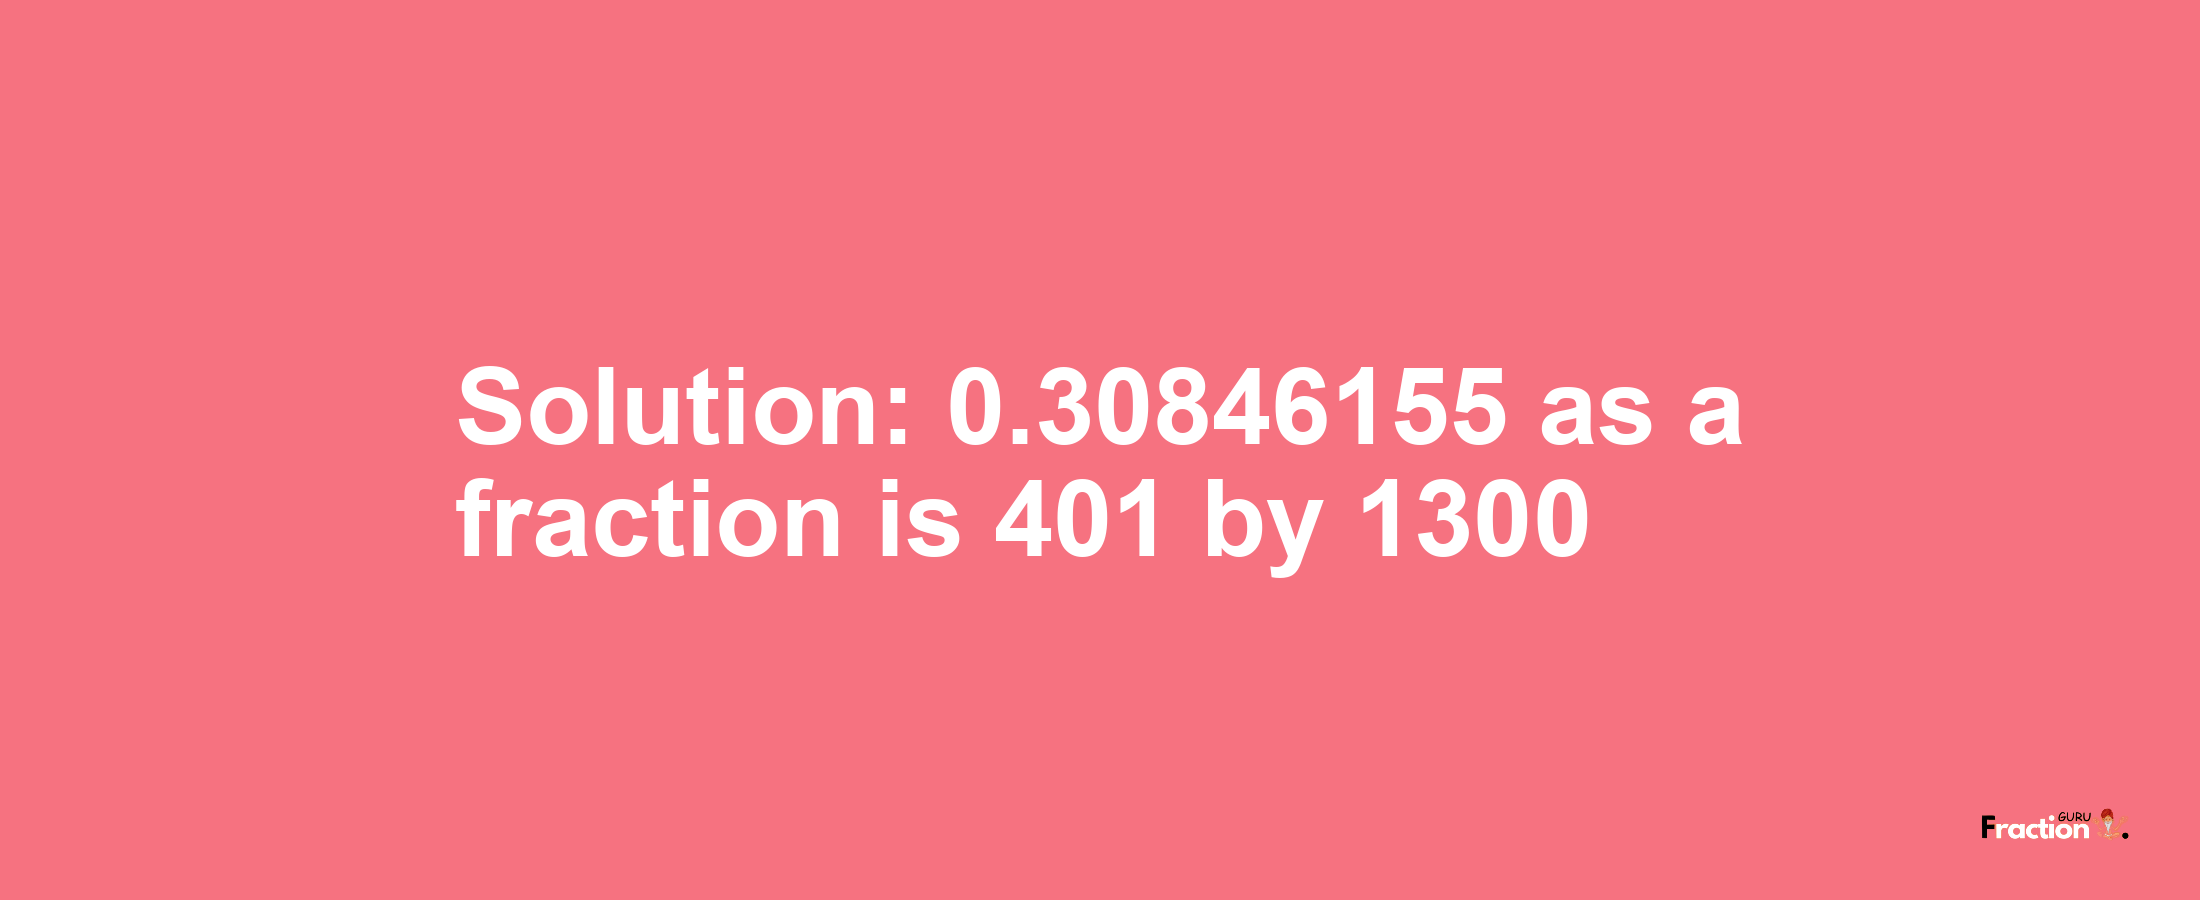 Solution:0.30846155 as a fraction is 401/1300